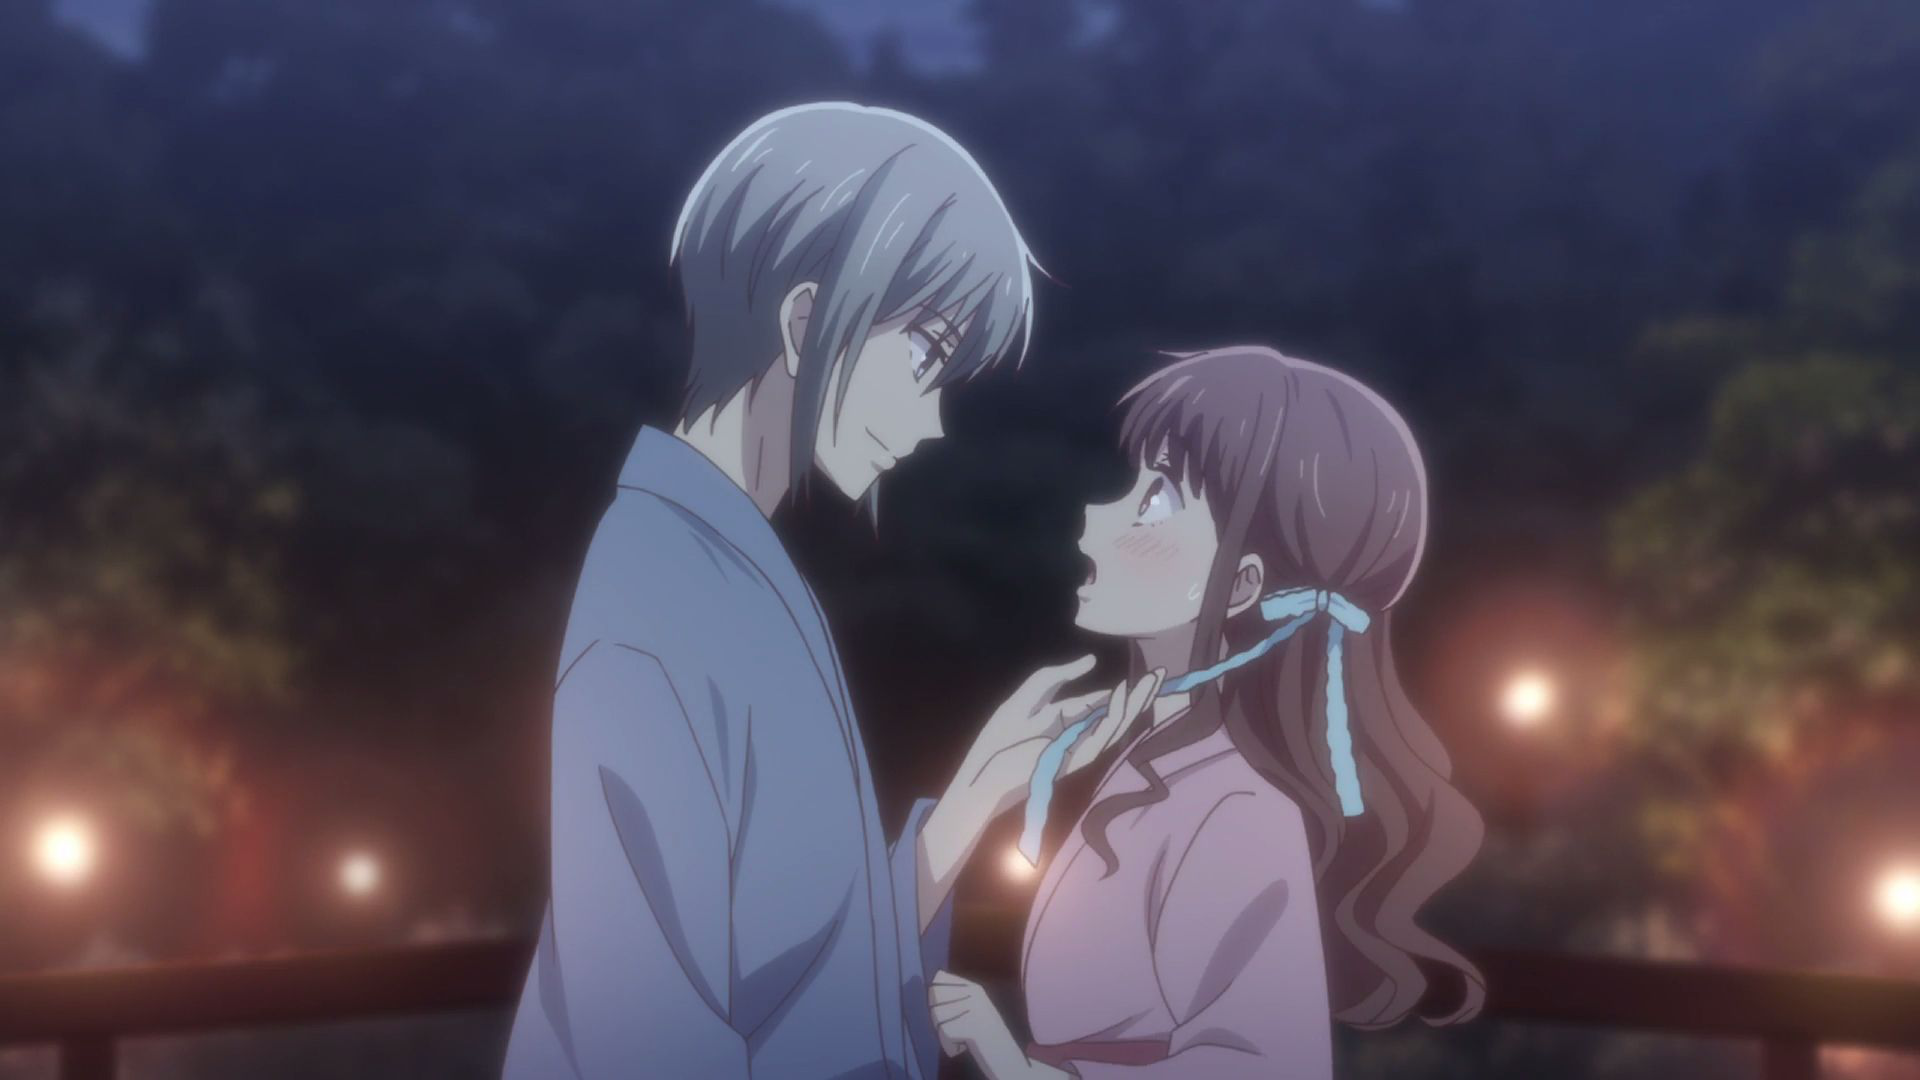 The 2019 anime Fruits Basket sums up 'the mortifying ordeal of